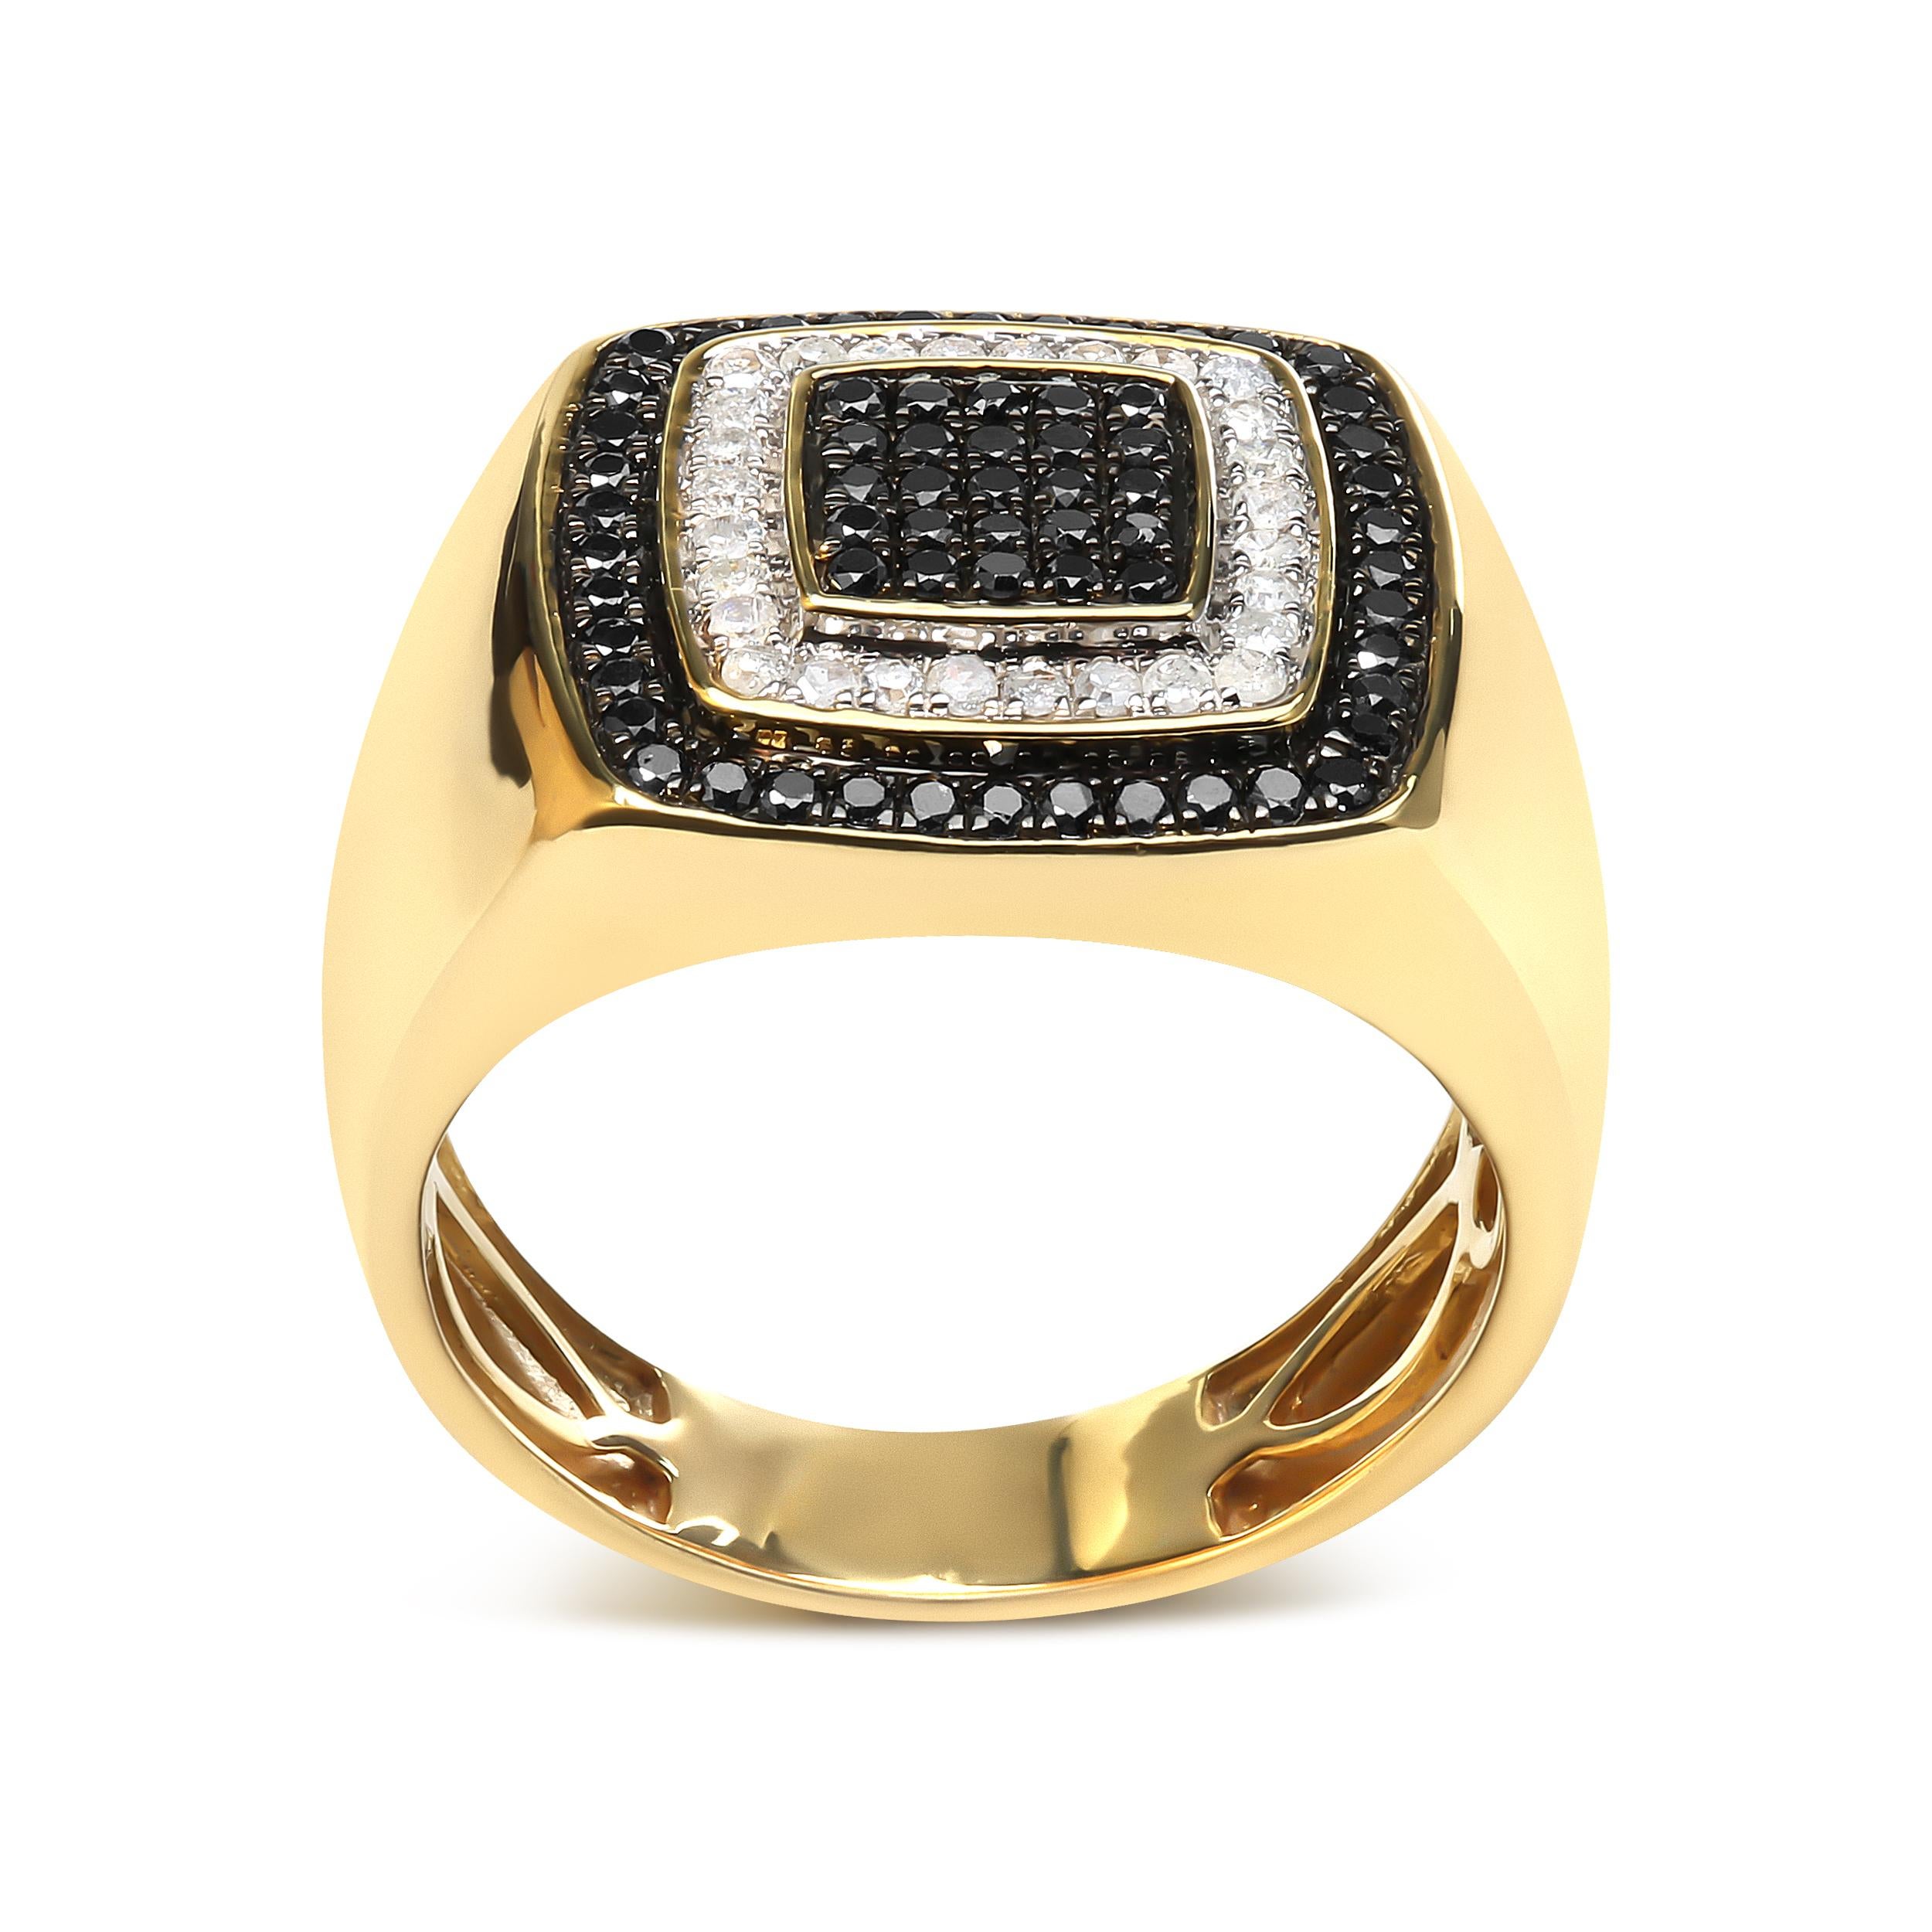 For Sale:  Men's 10K Yellow Gold 3/4 Carat White and Black Treated Diamond Ring Band 2